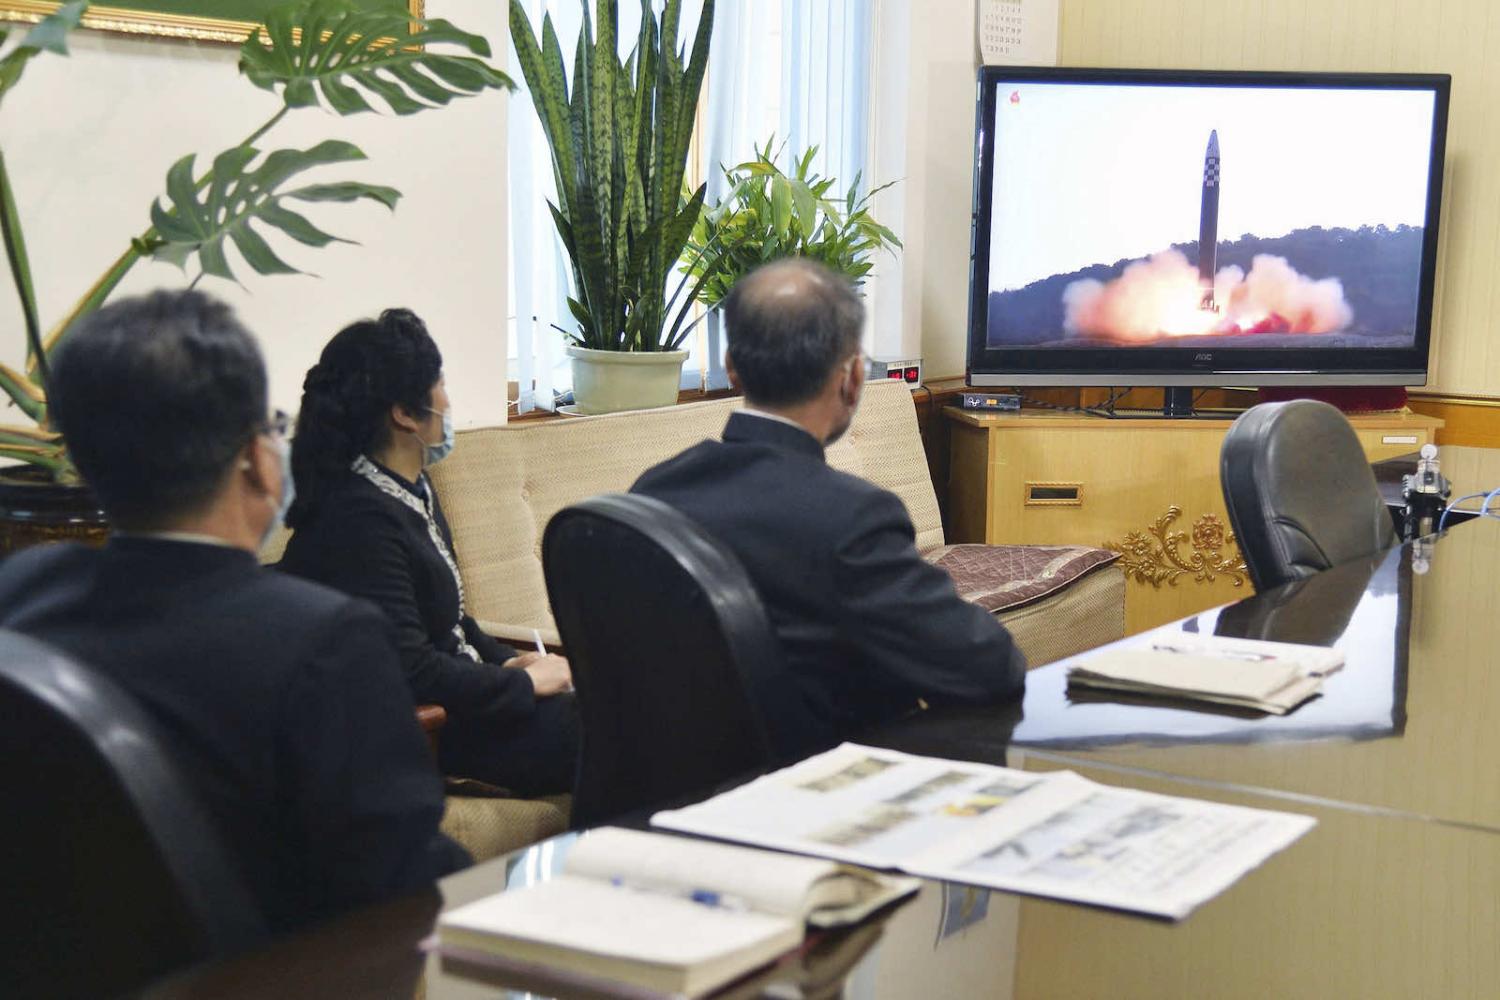 People watch Korean Central Television’s news of the previous day’s launch by North Korea of a new “Hwasong-17” intercontinental ballistic missile in Pyongyang on 25 March 2022 (Kyodo News via Getty Images)